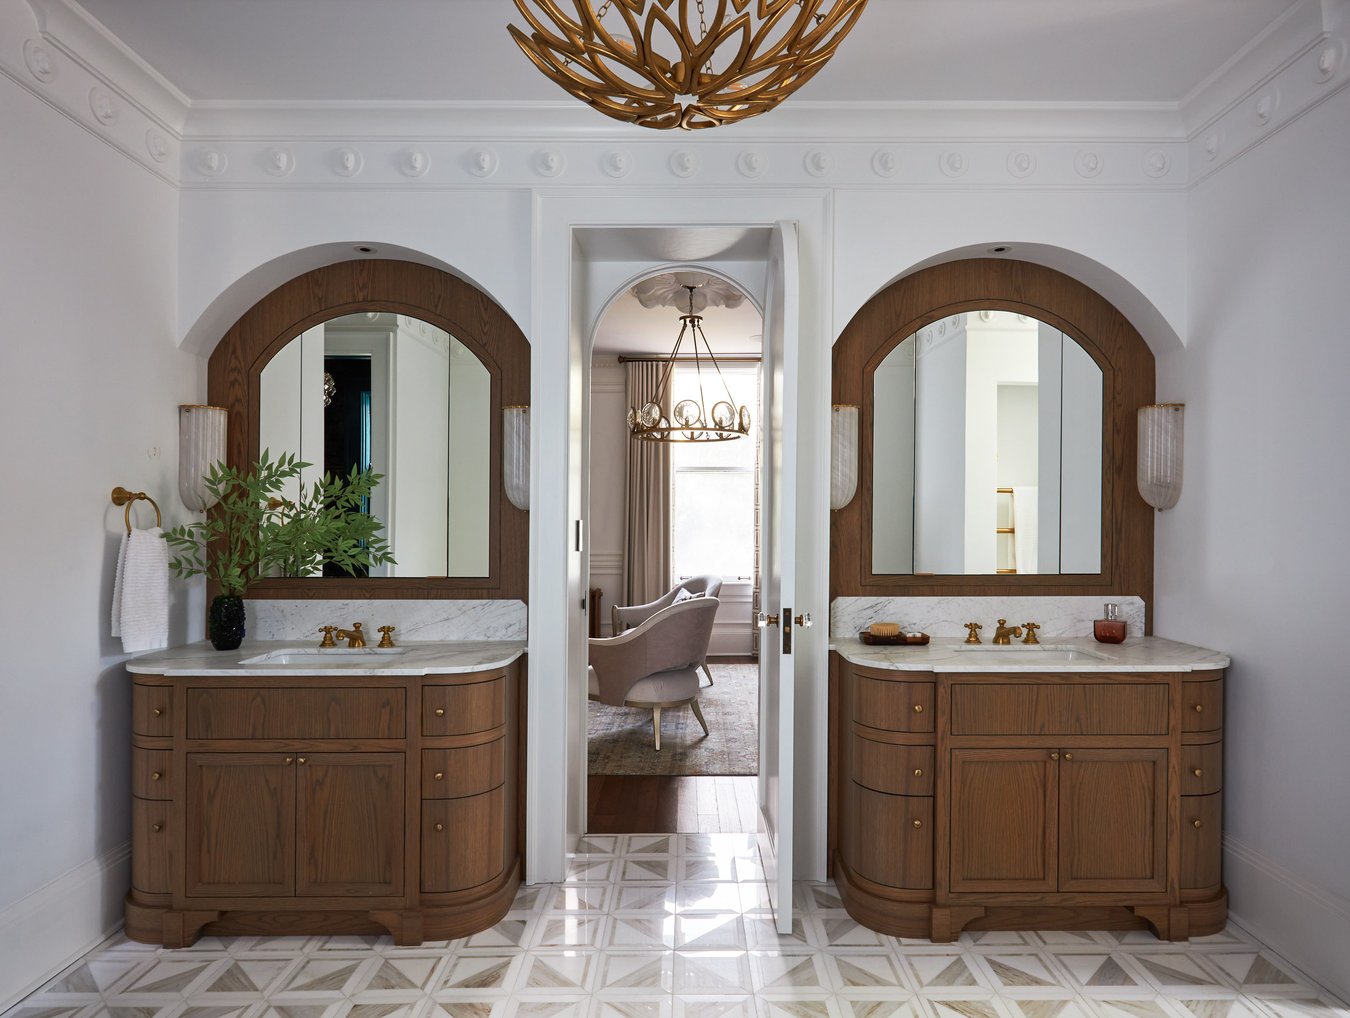 Double vanity sinks with rounded, oak cabinets and marble countertops in a bathroom designed by Jasmin Reese, Chicago.